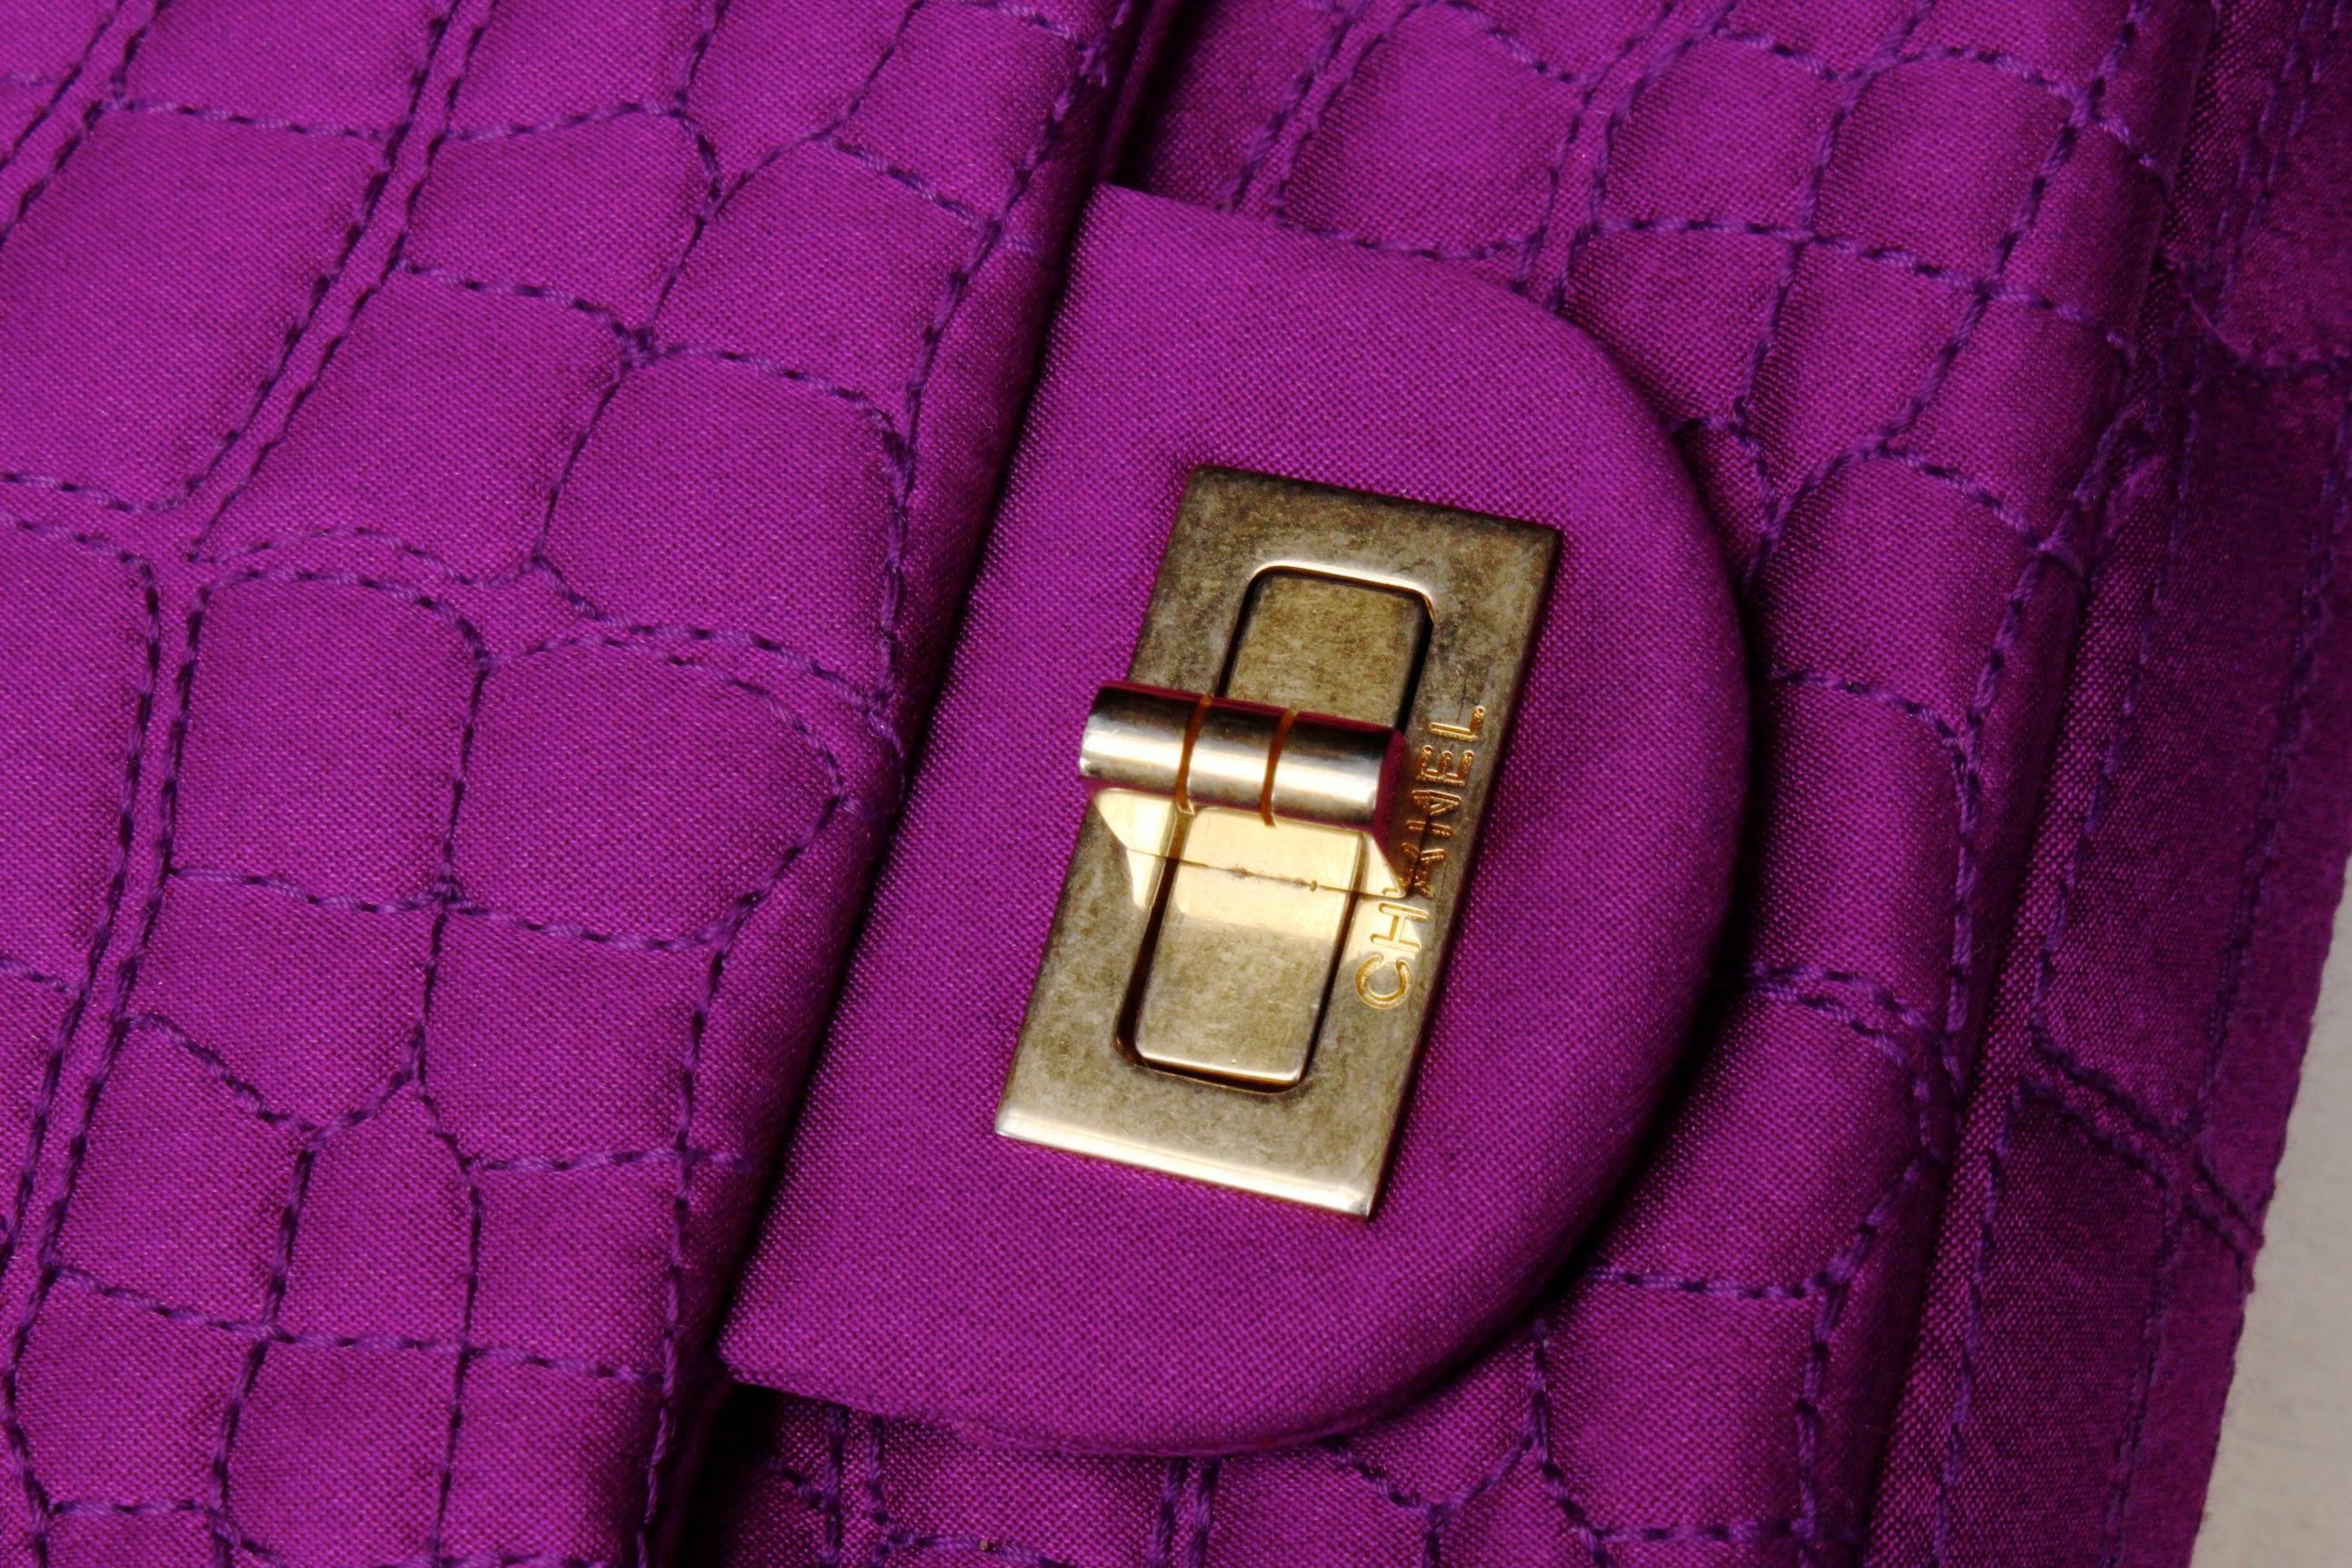 Chanel 2-55 Purple Satin Shoulder Bag with Crocodile Pattern, 2000s  In Excellent Condition For Sale In Paris, FR